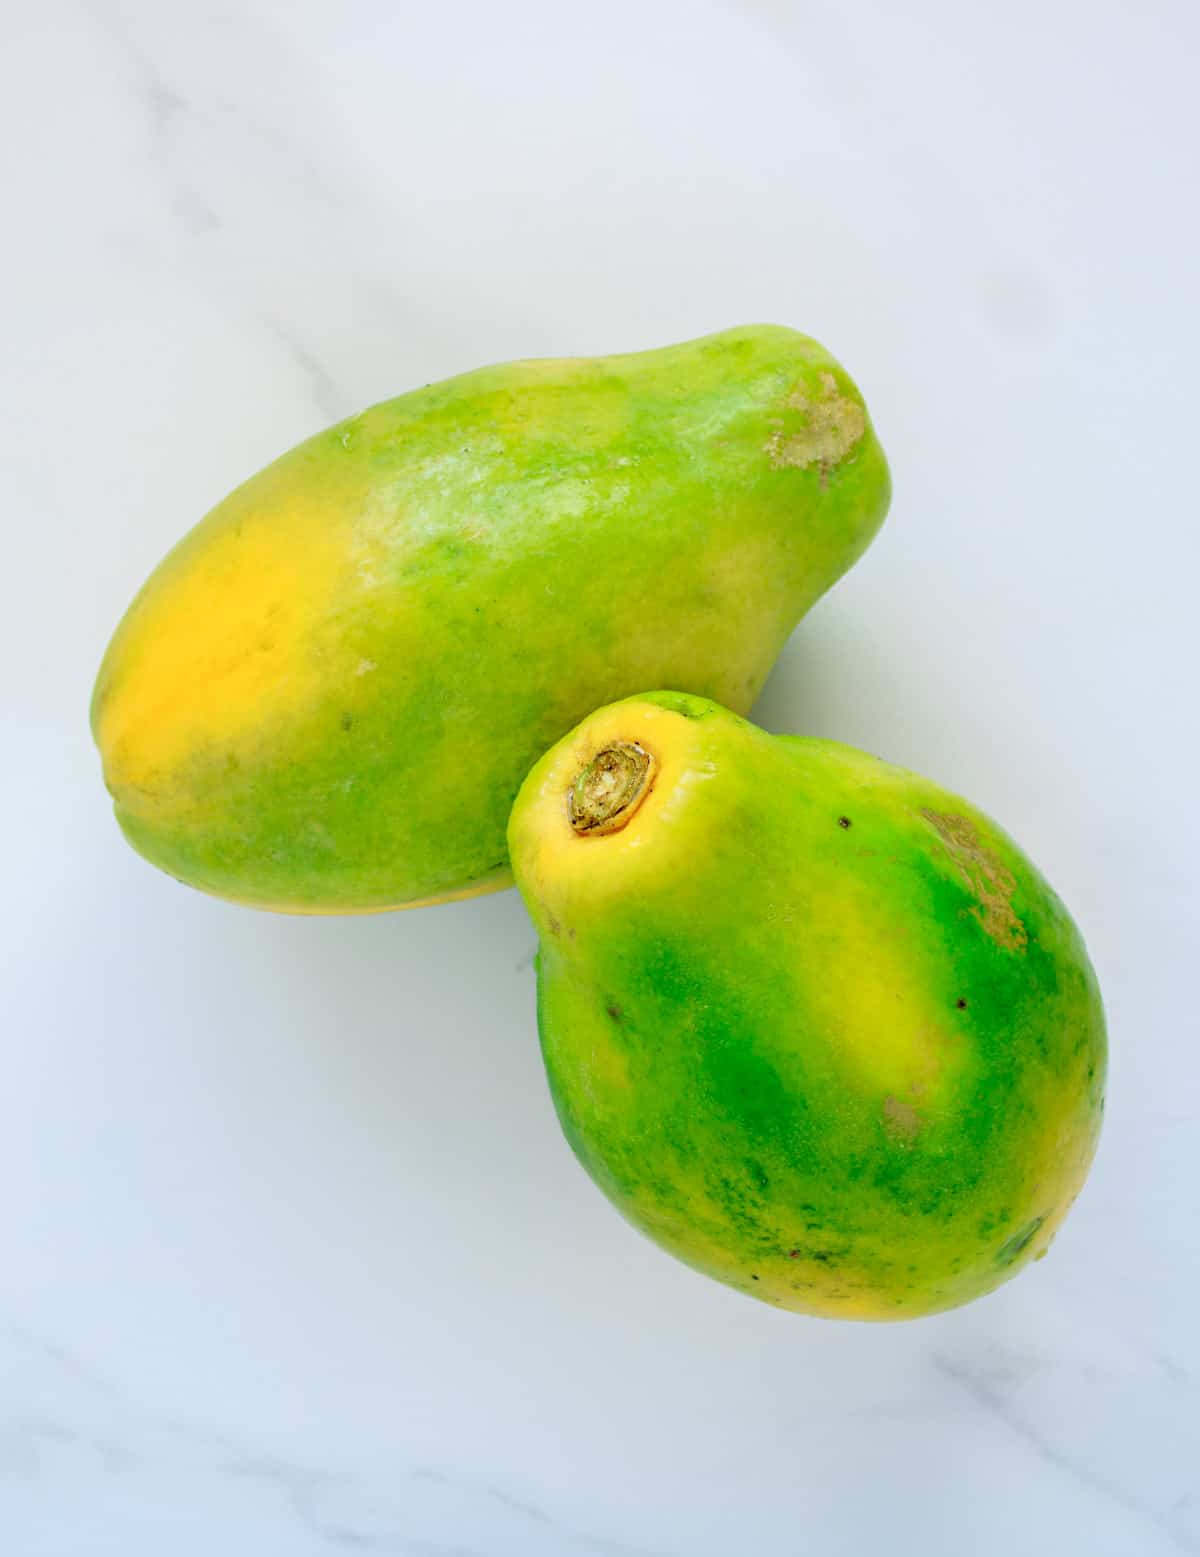 Two whole papayas half yellow and half green in color.